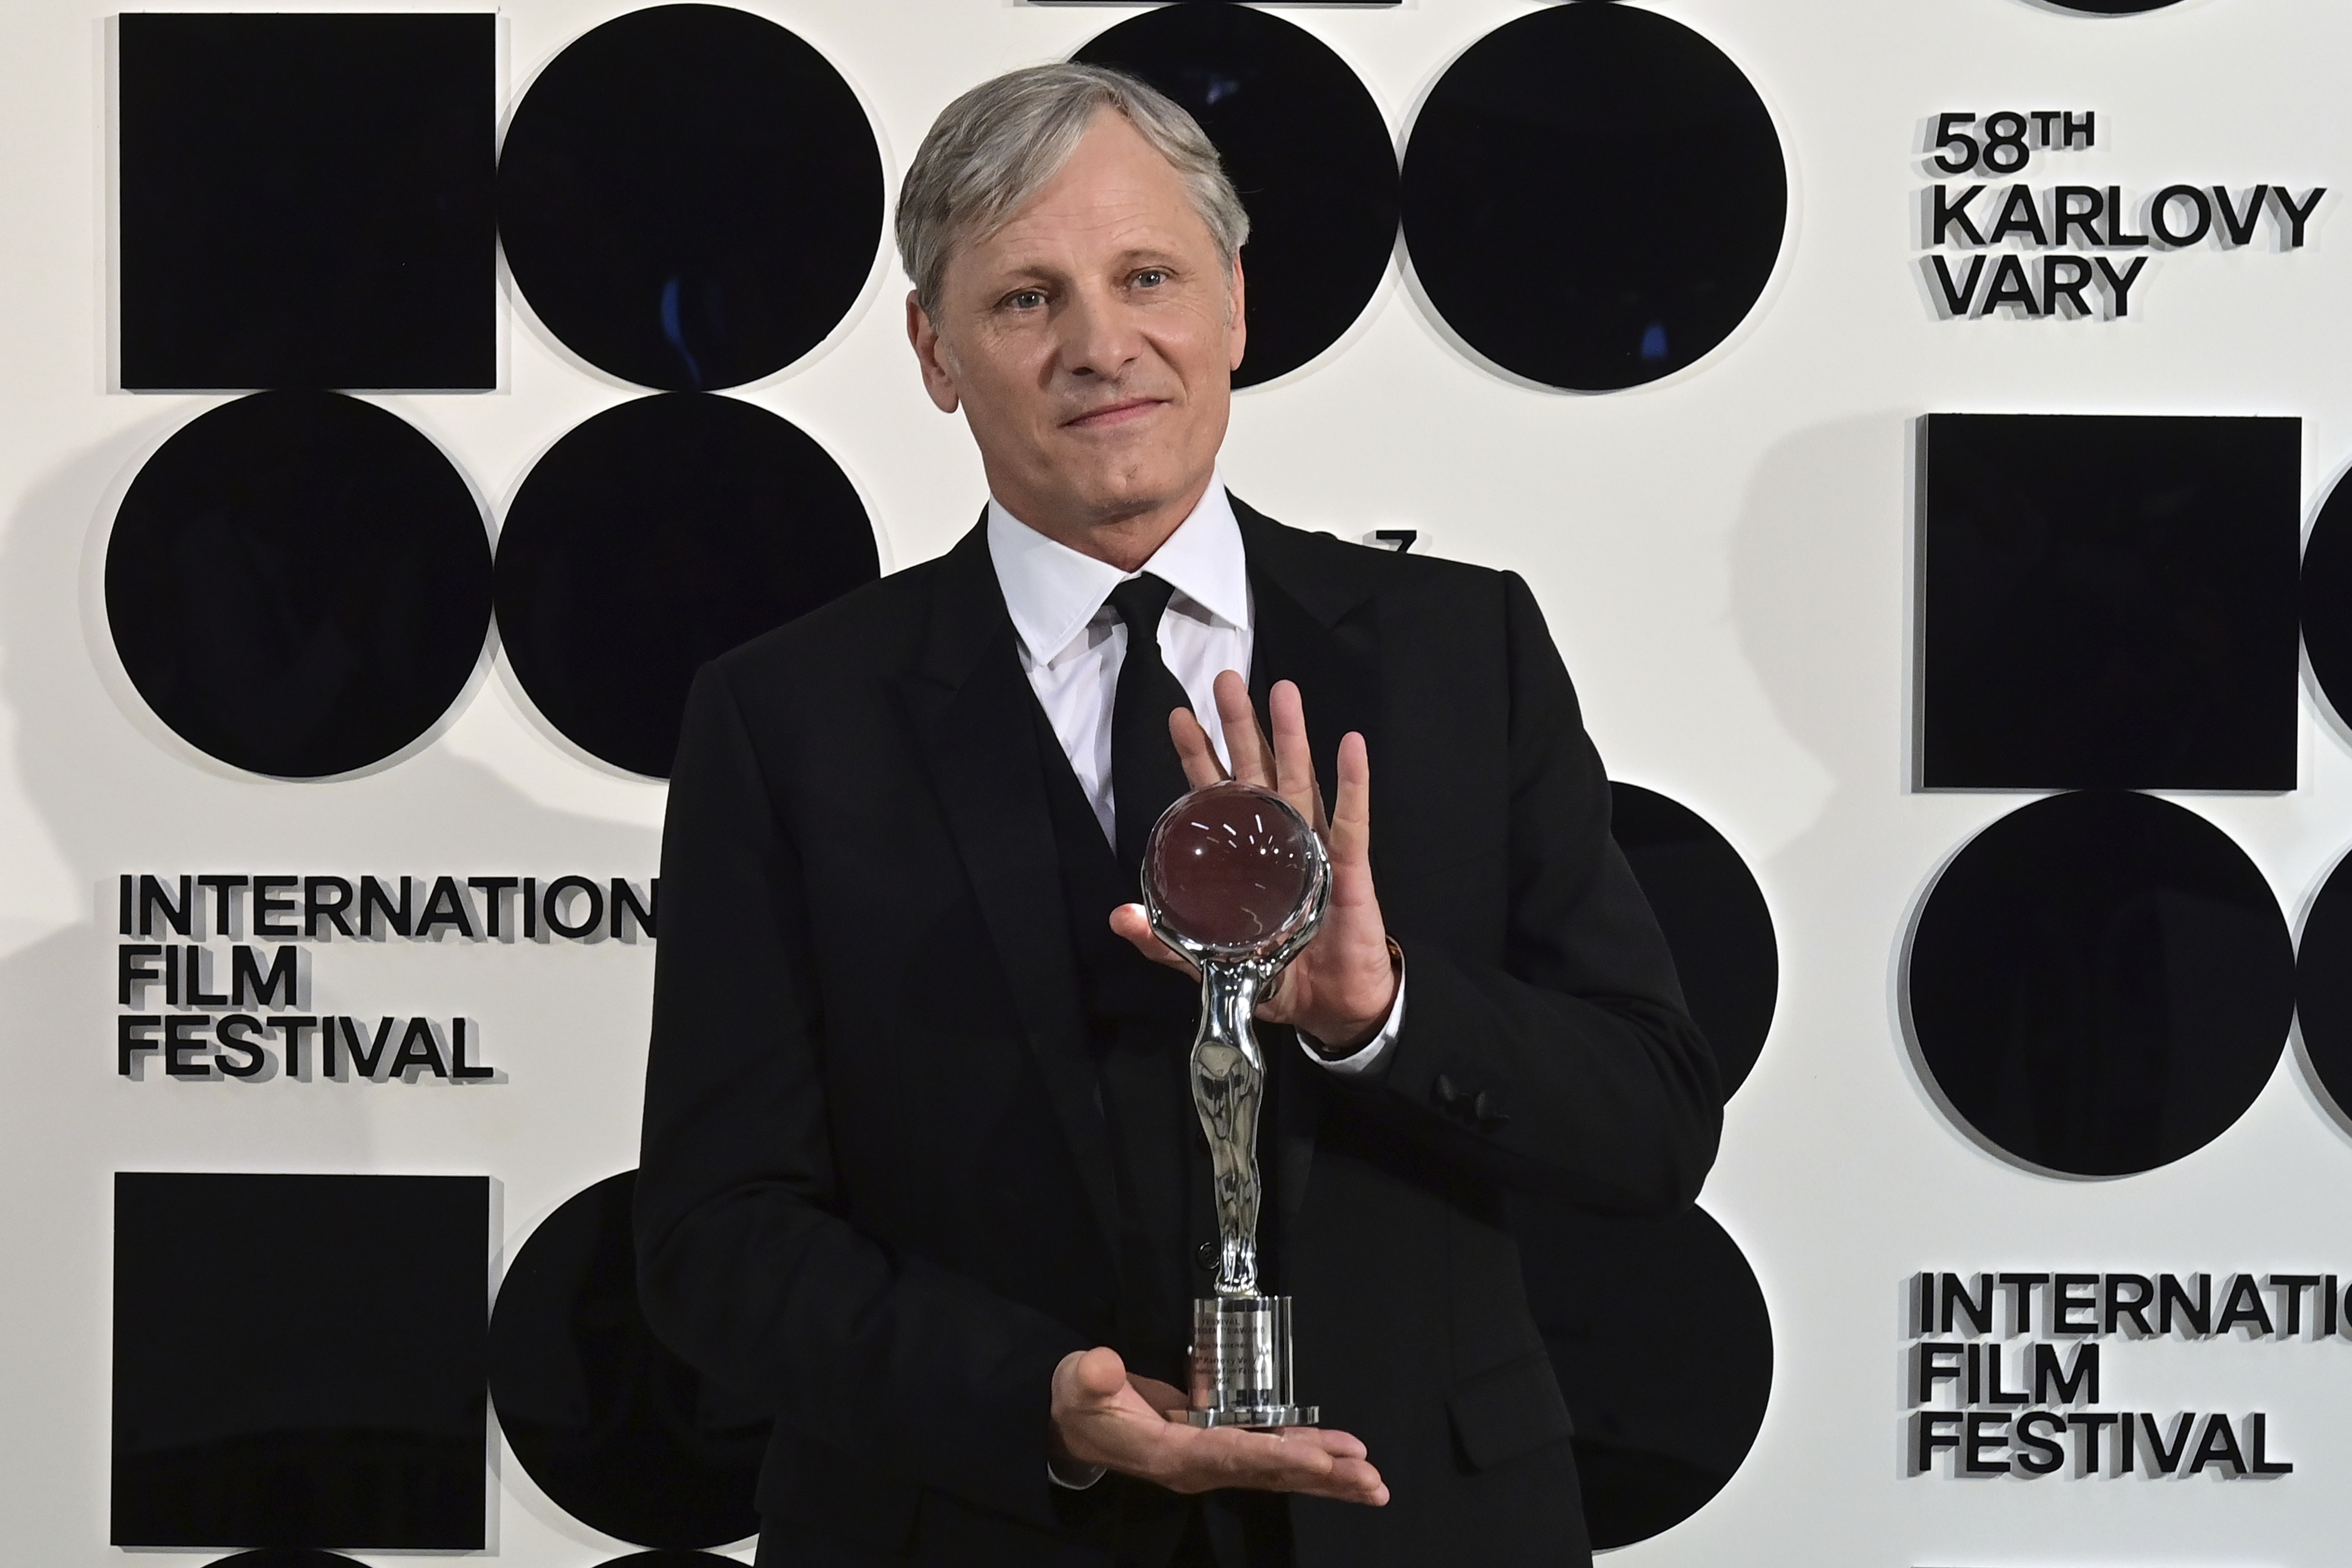 U.S. actor and director Viggo Mortensen poses with the Golden Globe award received during the opening ceremony of the 58th Karlovy Vary International Film Festival in Karlovy Vary, Czech Republic, Friday, June 28, 2024. An international film festival in the western Czech spa of Karlovy Vary has kicked off with an honor for U.S. actor and director Viggo Mortensen. Mortensen, who was nominated three times for the Academy Award as the best actor, received the Festival President’s Award at Friday’s opening ceremony and present the second movie he directed “The Dead Don’t Hurt.” (Slavomir Kubes/CTK via AP)